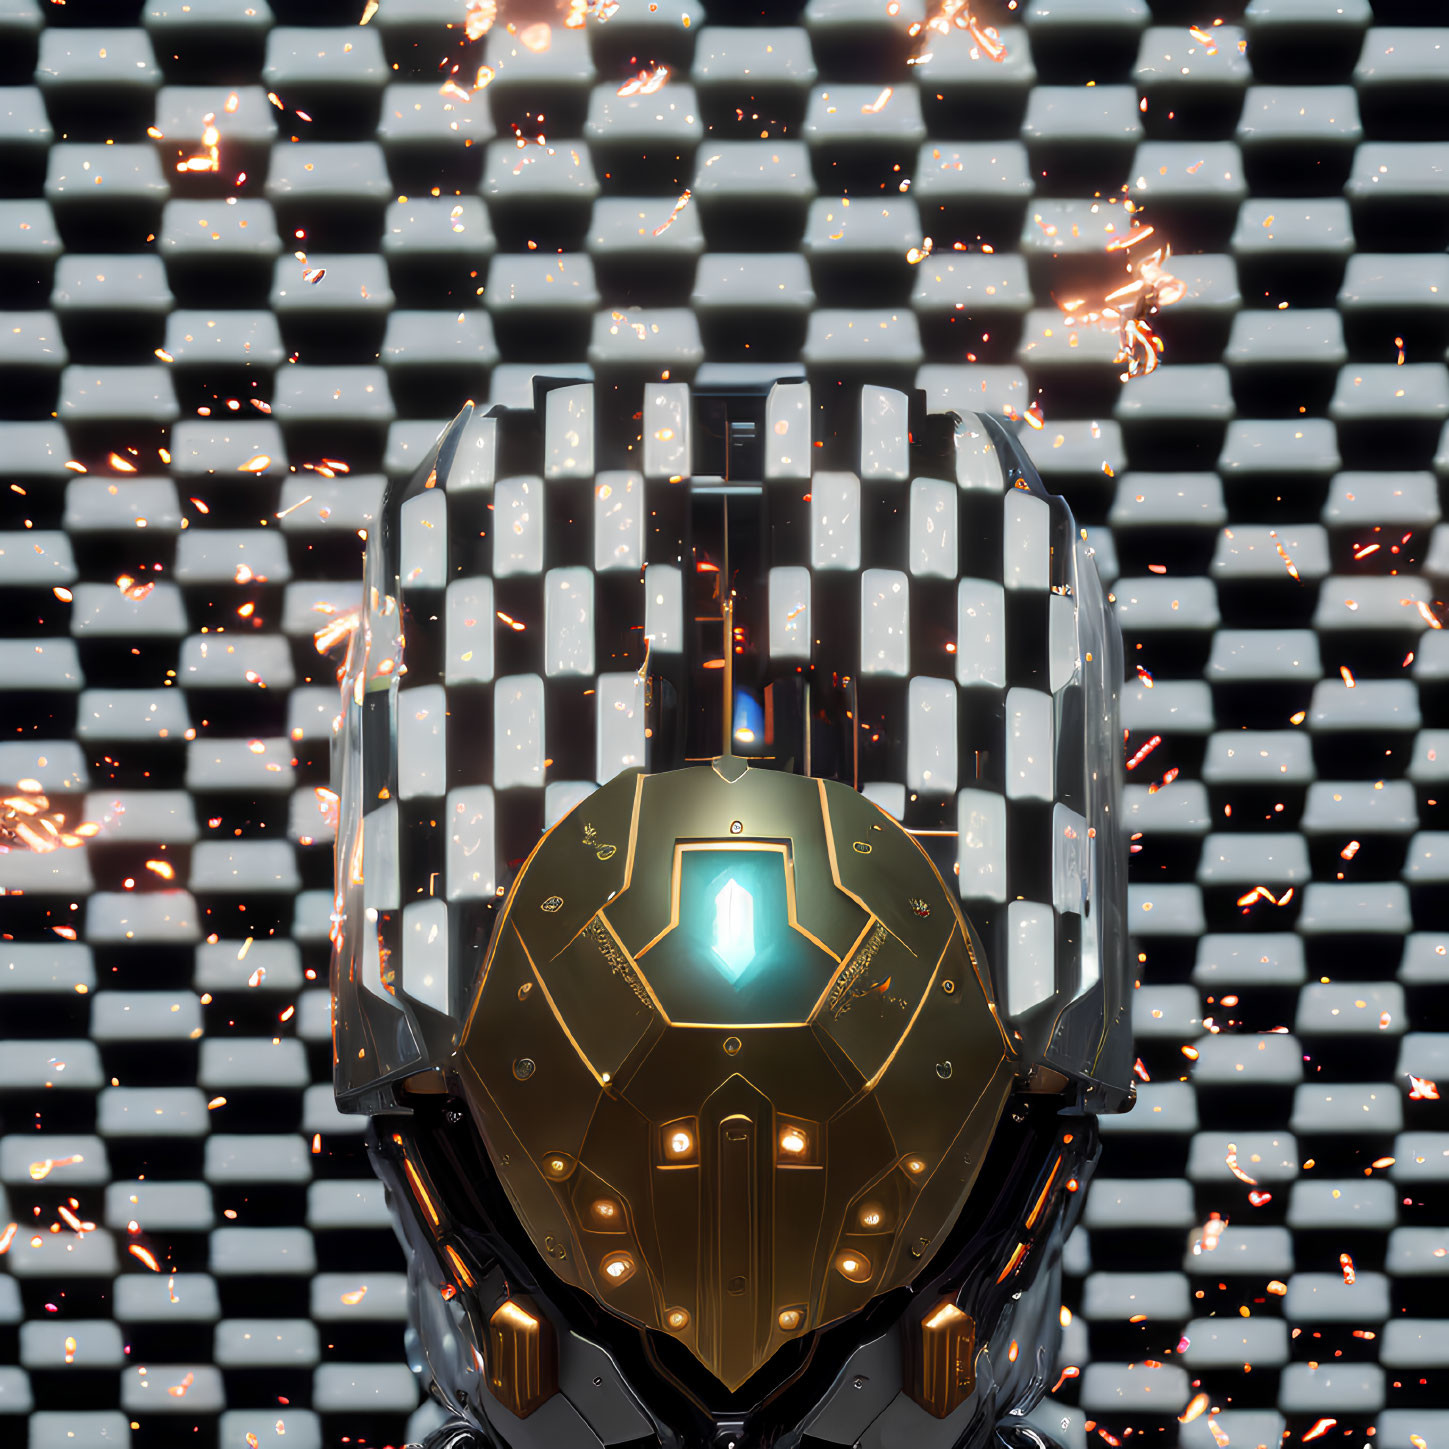 Futuristic knight with glowing blue visor and golden-trimmed shield in front of pixelated